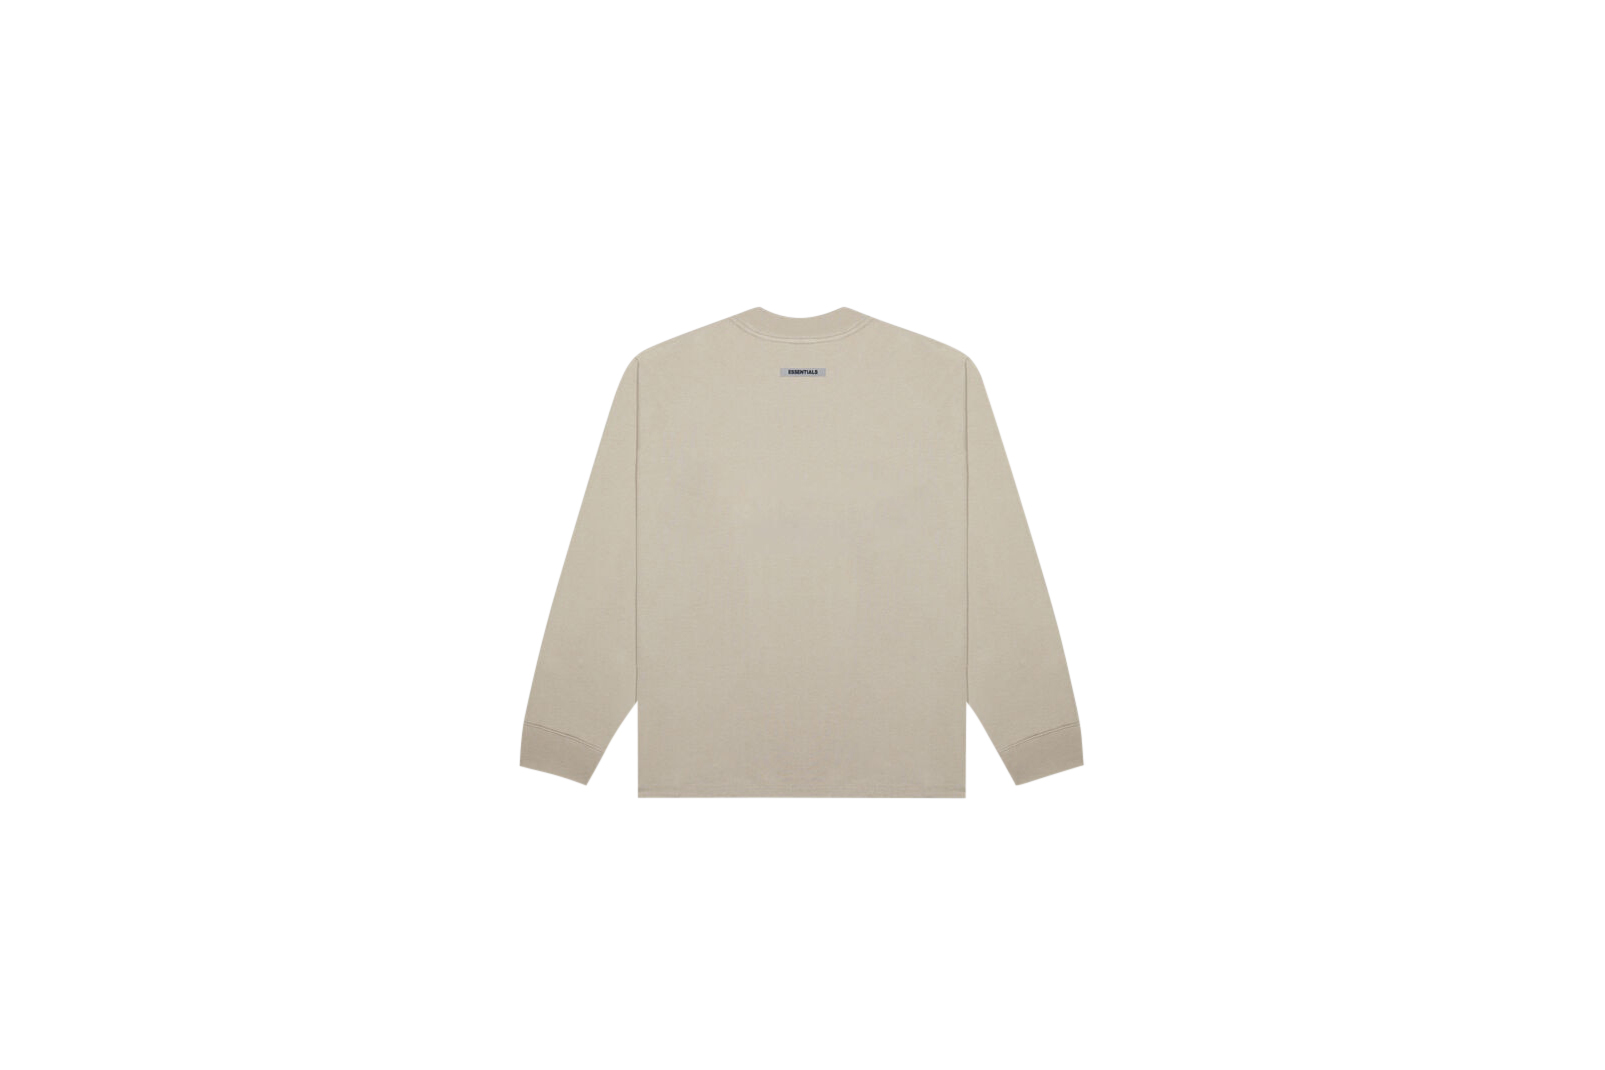 Fear of God Essentials 3D Silicon Applique Boxy Long Sleeve T 